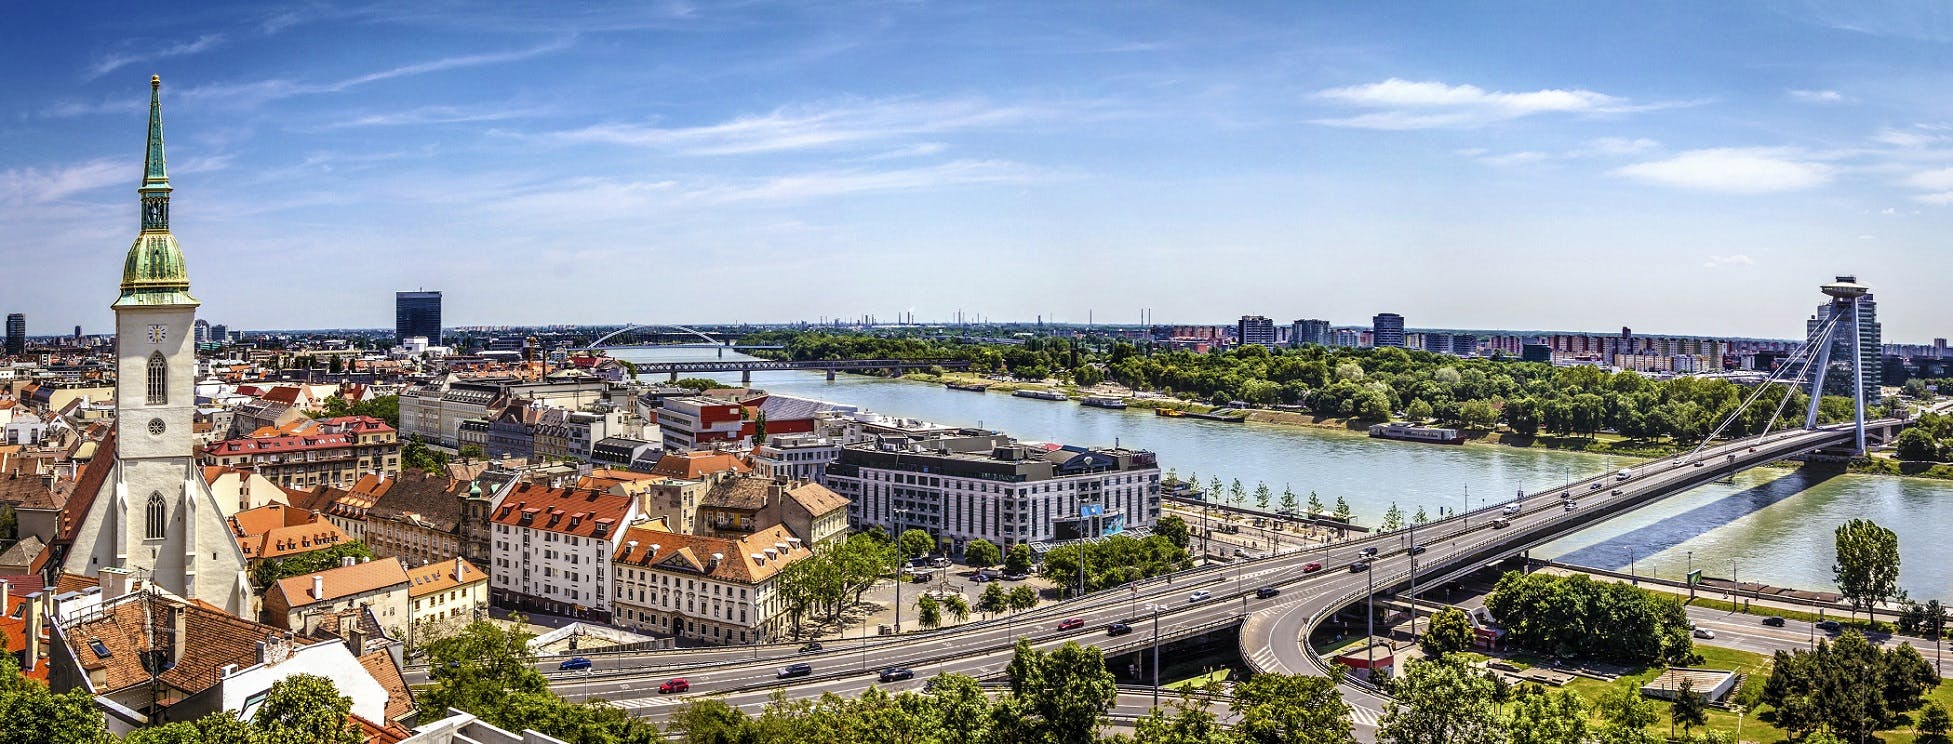 Discover Bratislava A Private Day Trip from Vienna with Guided Tour